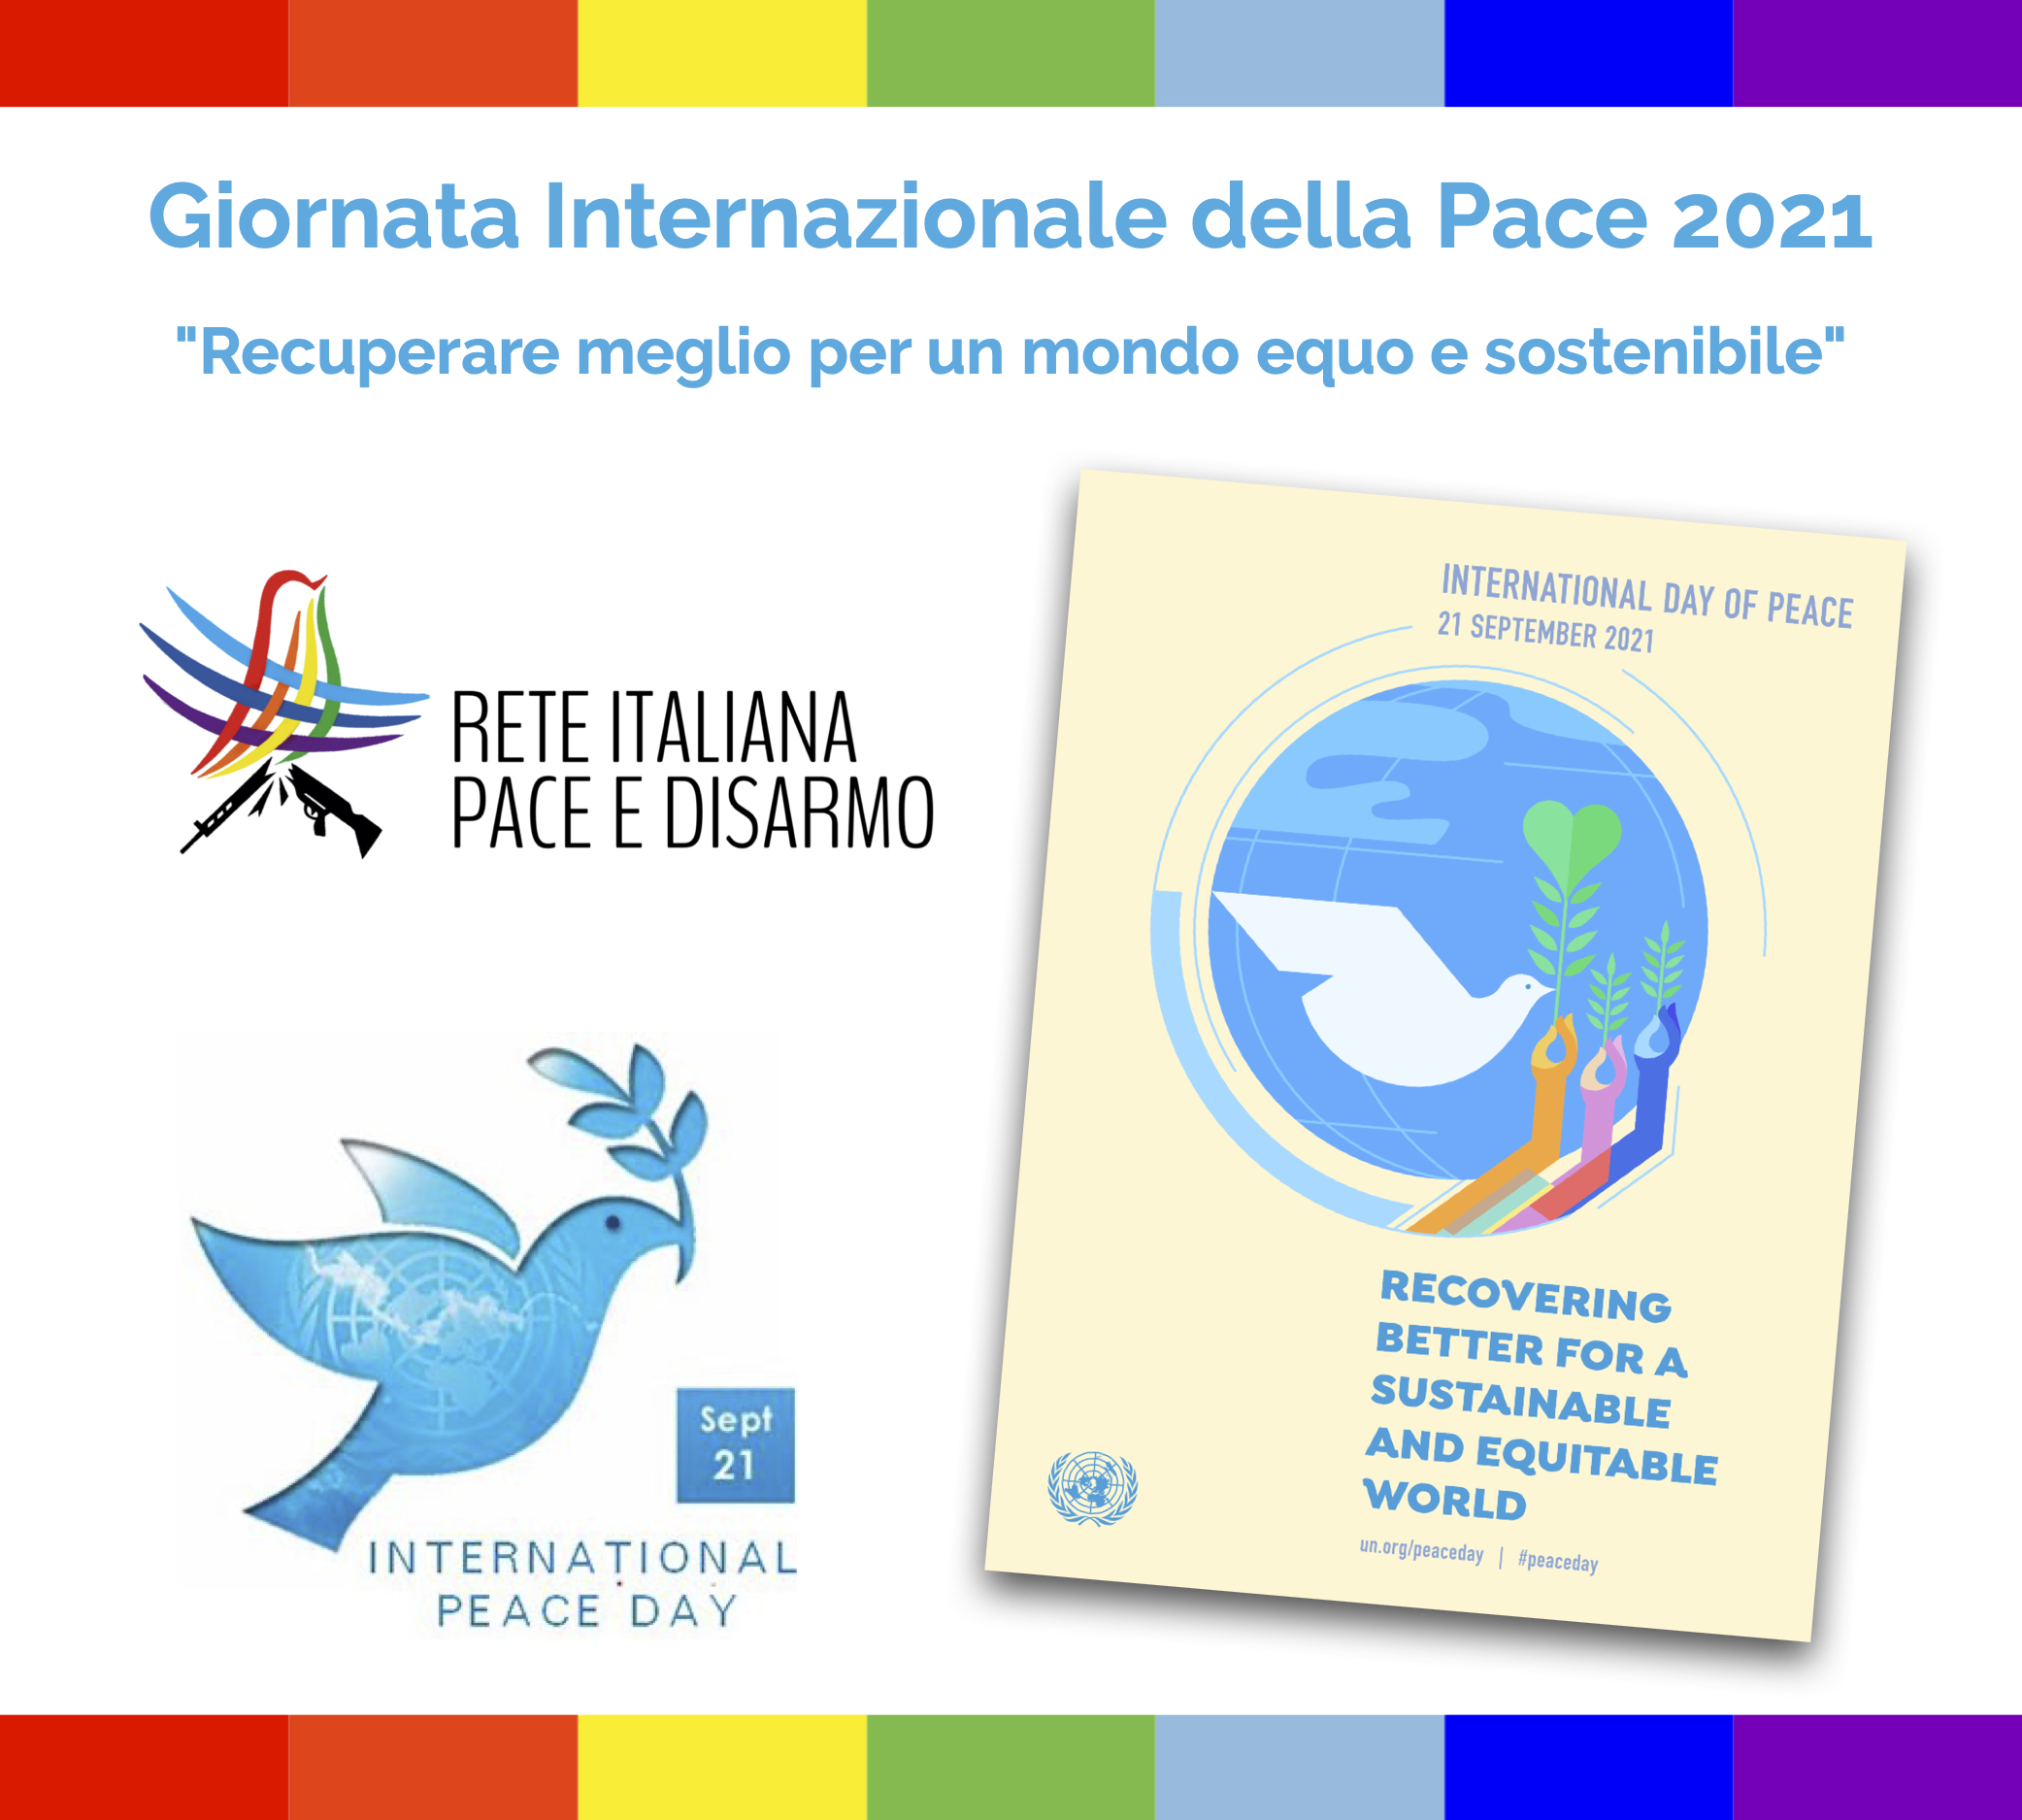 #PeaceDay 2021: Rete Pace Disarmo turns one year old by strengthening its work for a nonviolent society